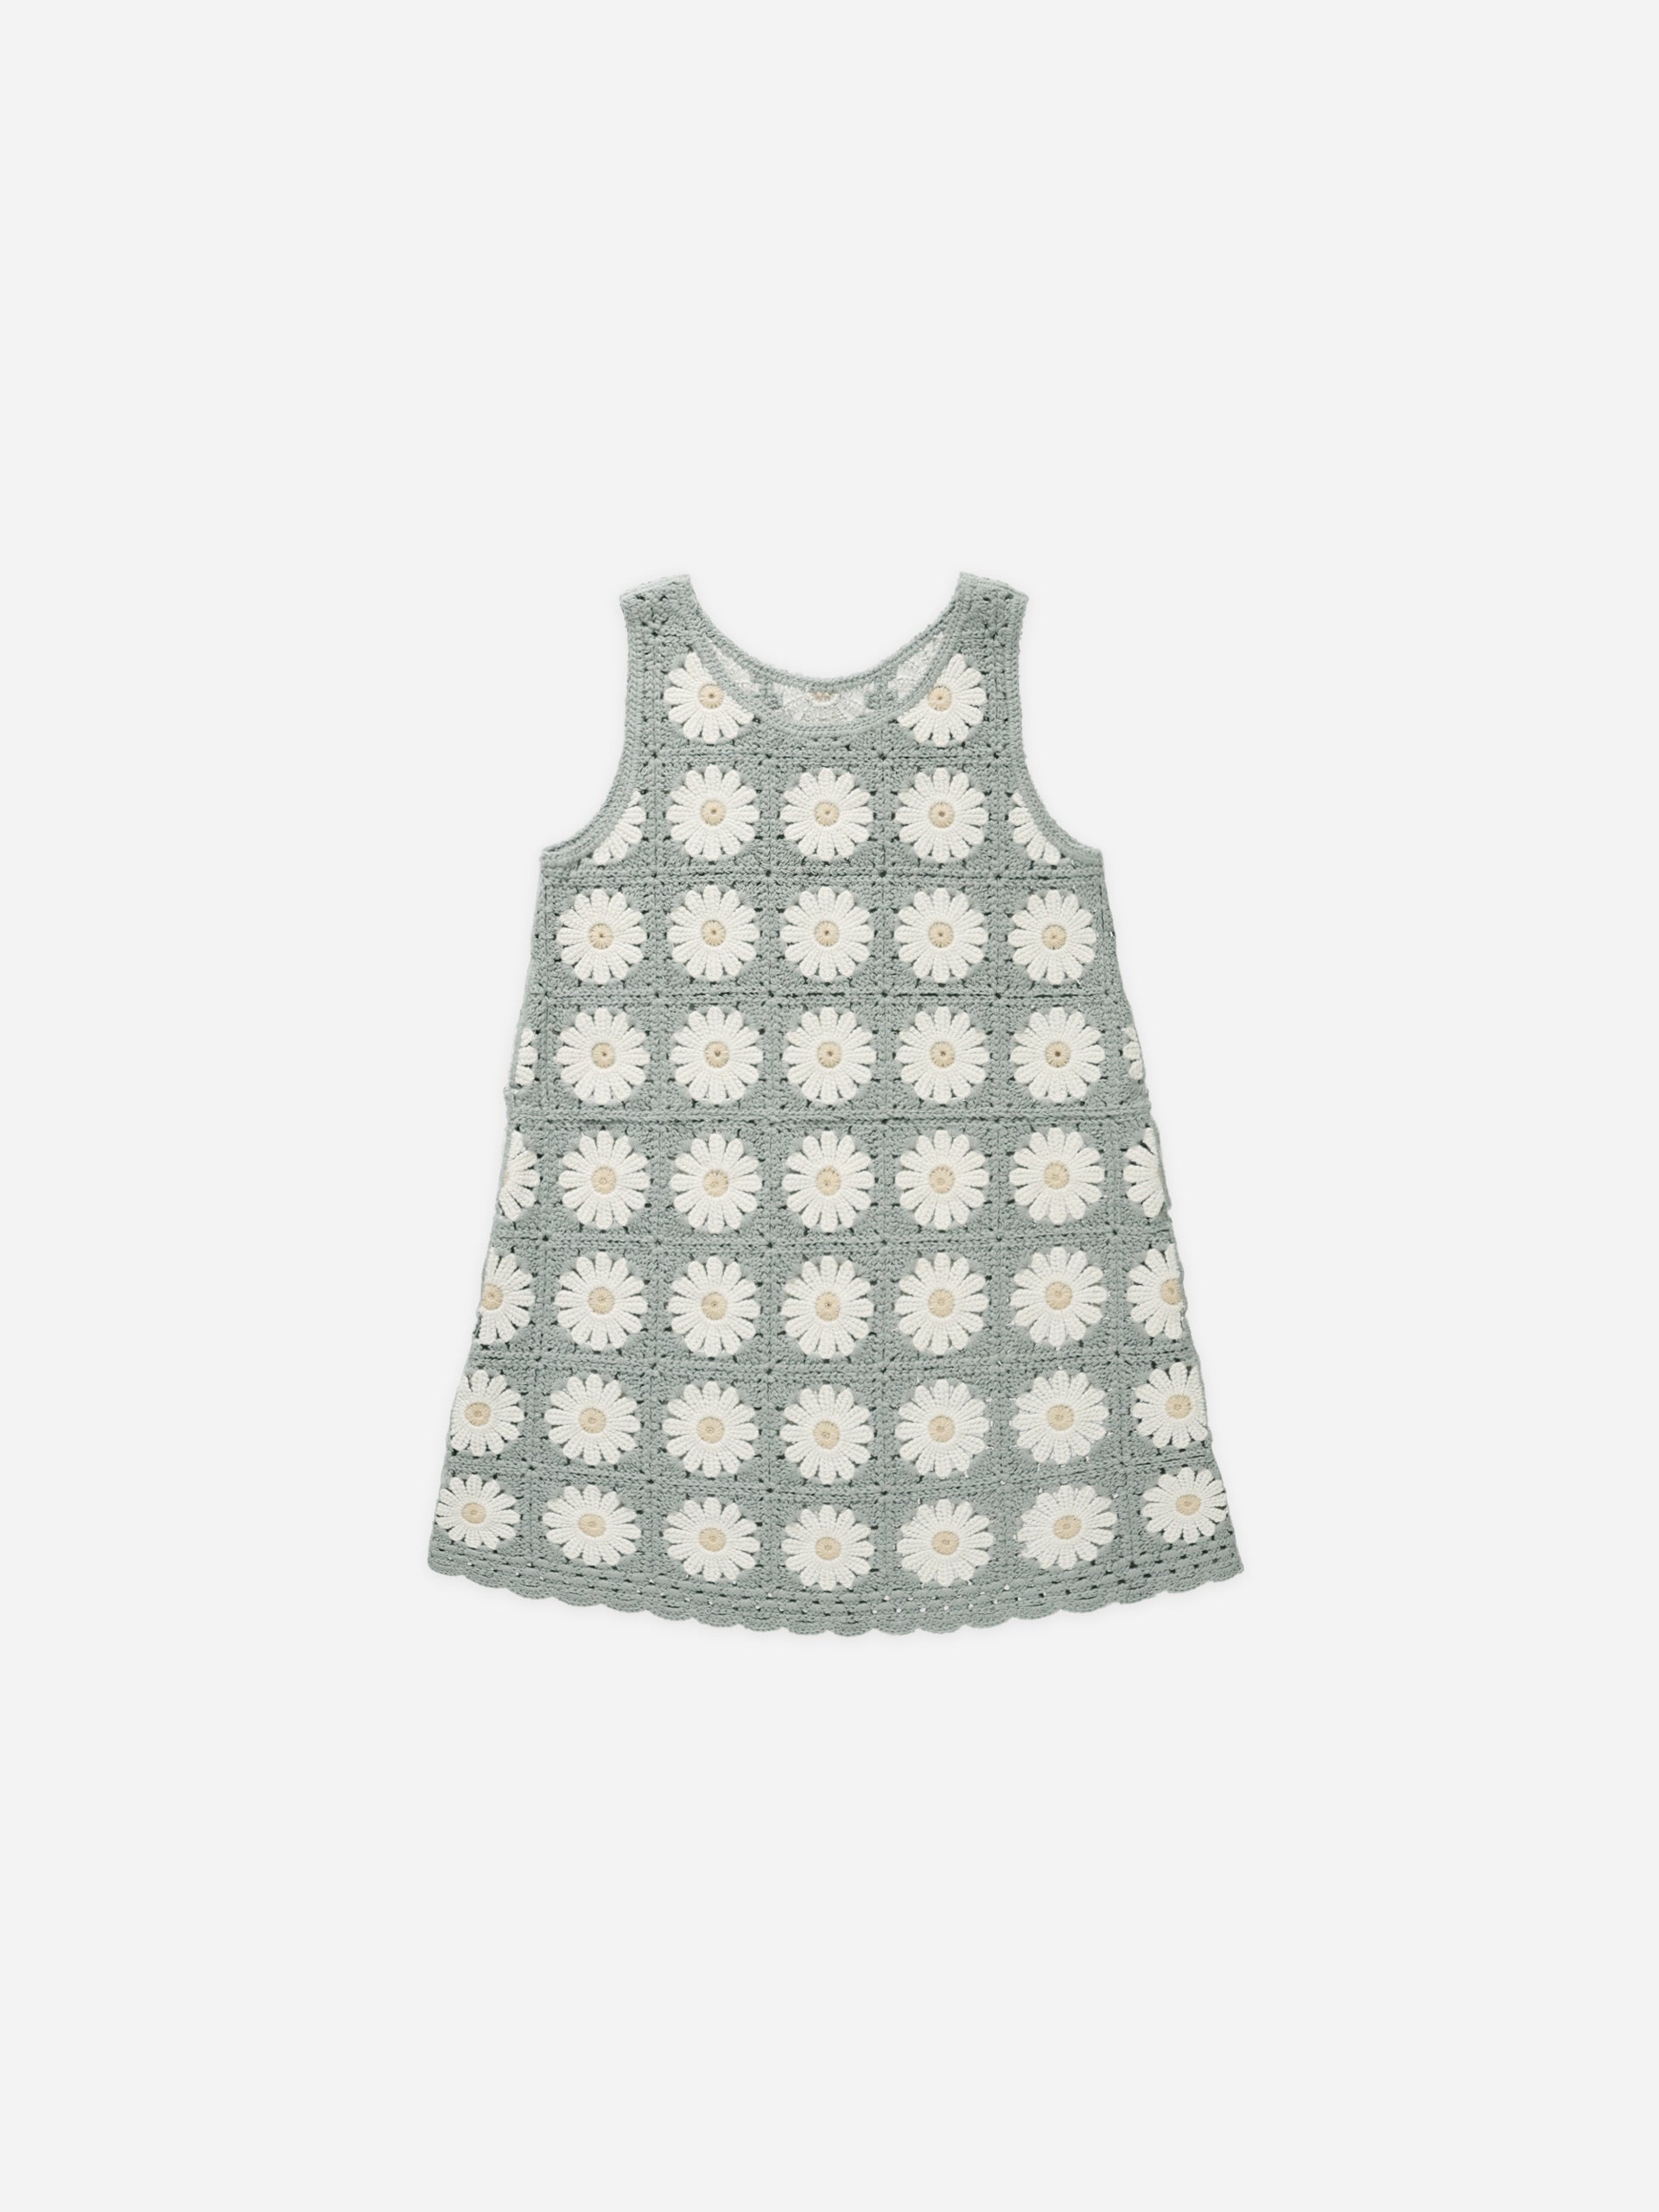 Crochet Tank Mini Dress || Daisy - Rylee + Cru | Kids Clothes | Trendy Baby Clothes | Modern Infant Outfits |